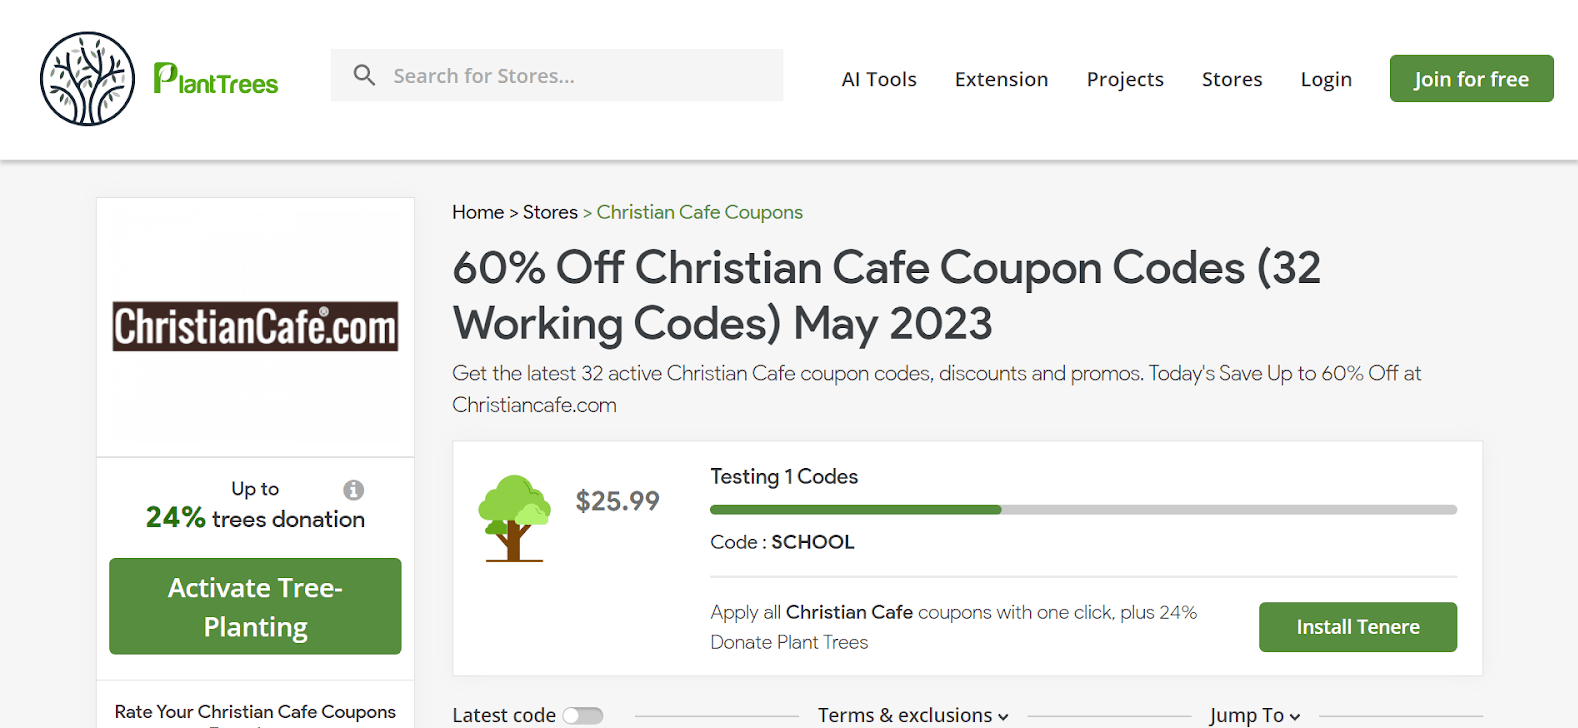 How To Use Christian Cafe Discount Codes 2